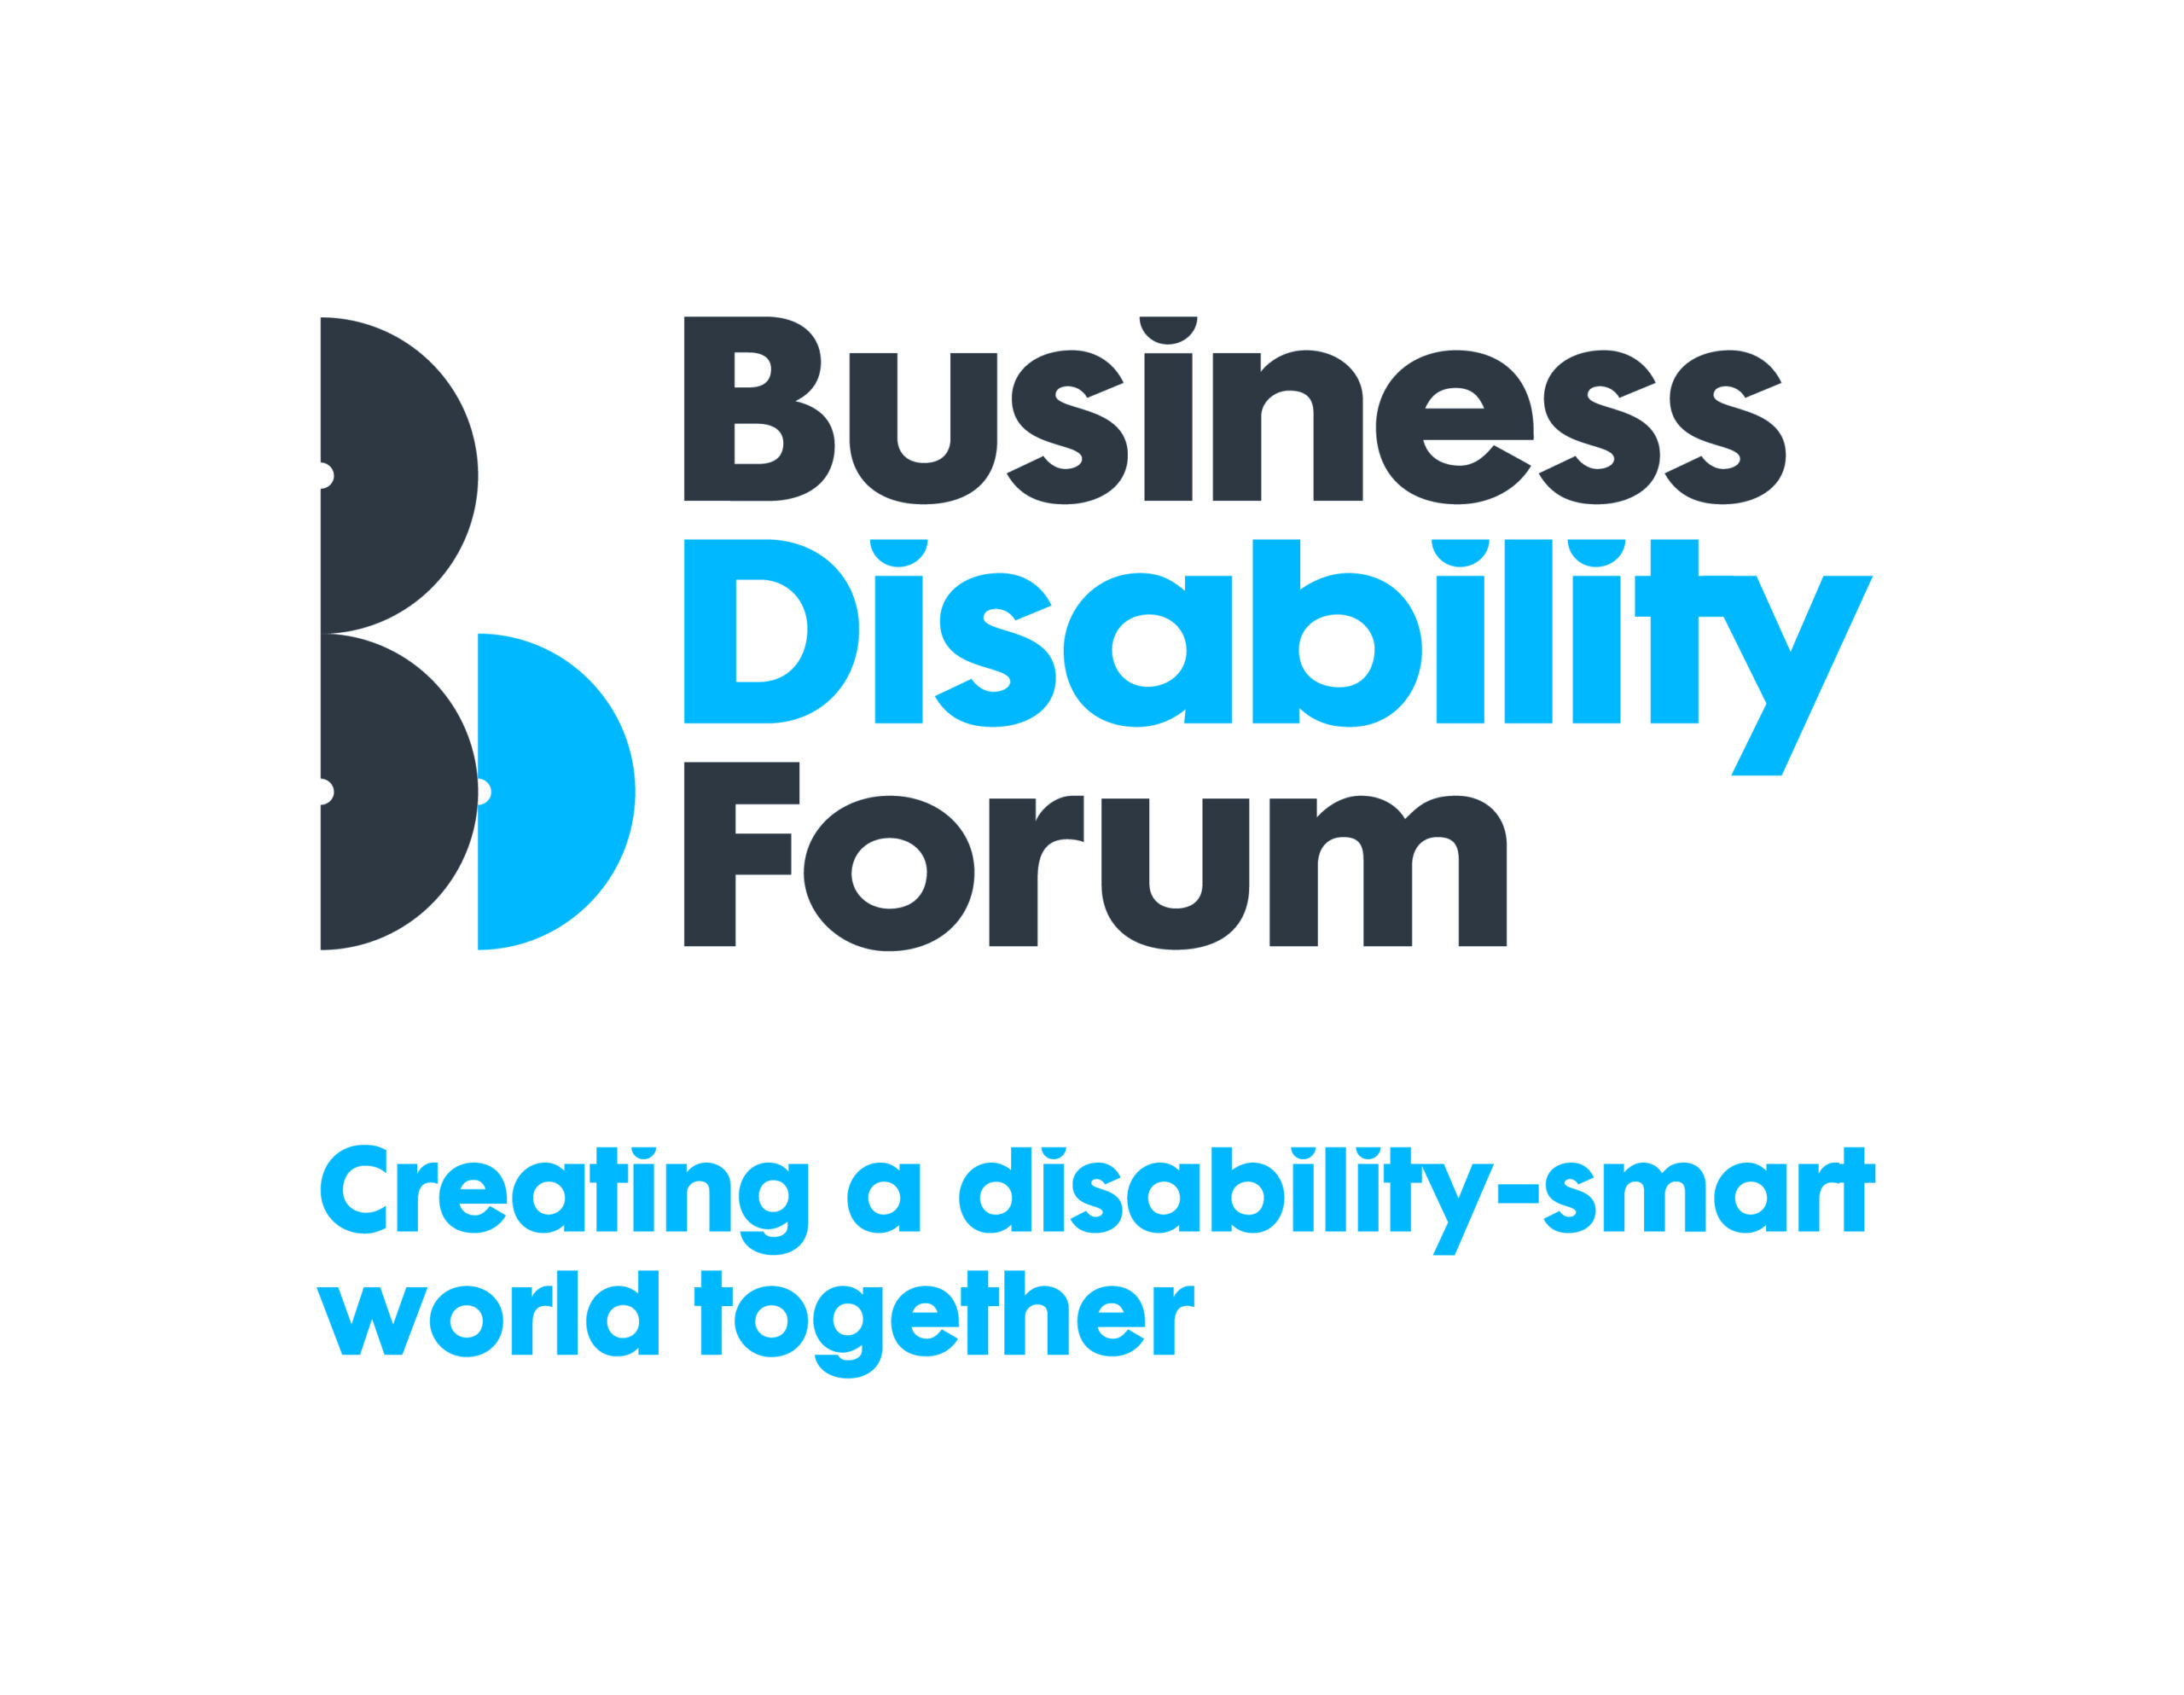 Disability Form Logo with circular icons in blue and black colours